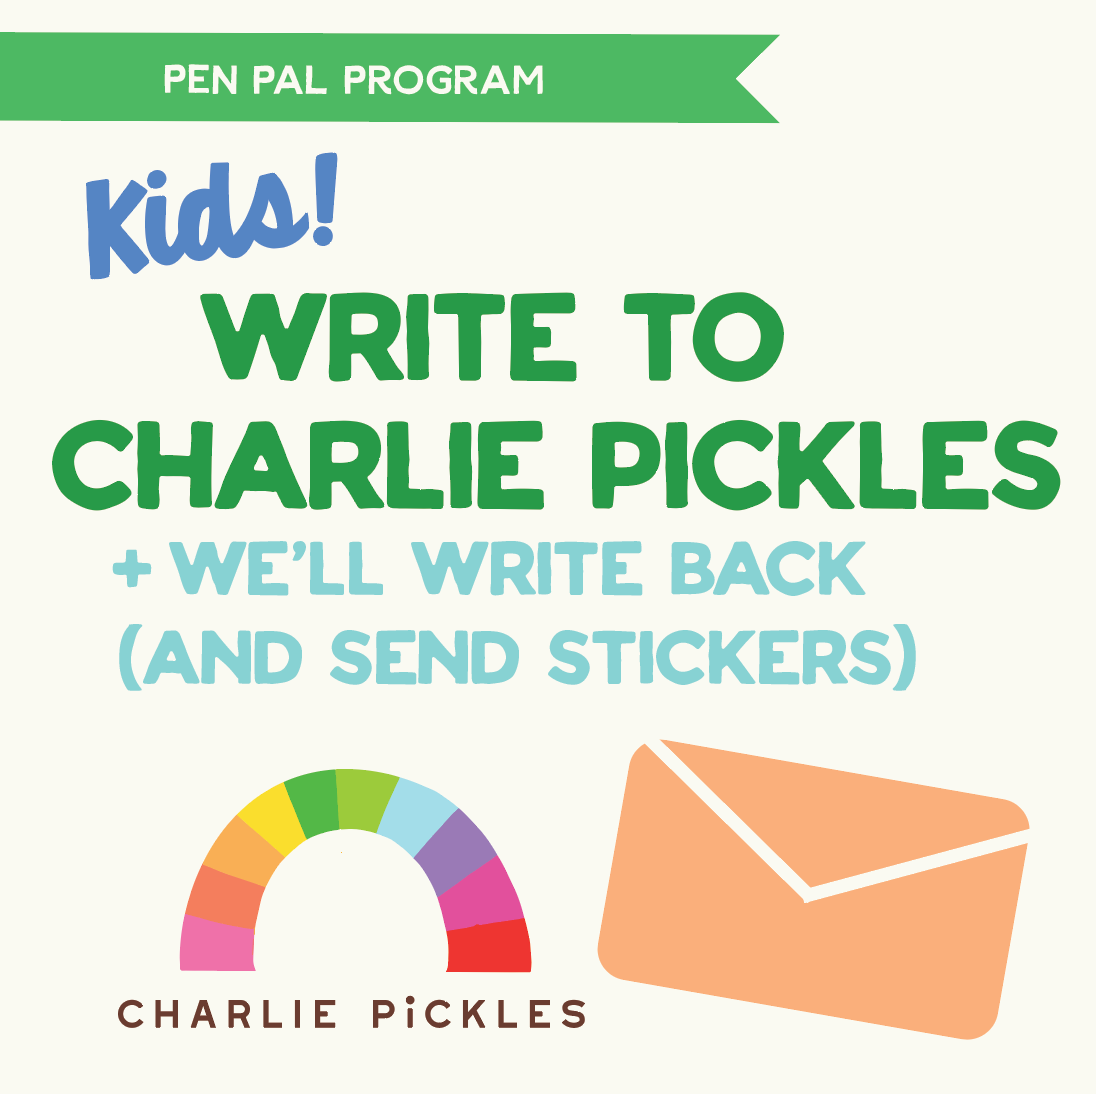 Did you know we have a Pen Pal Program?